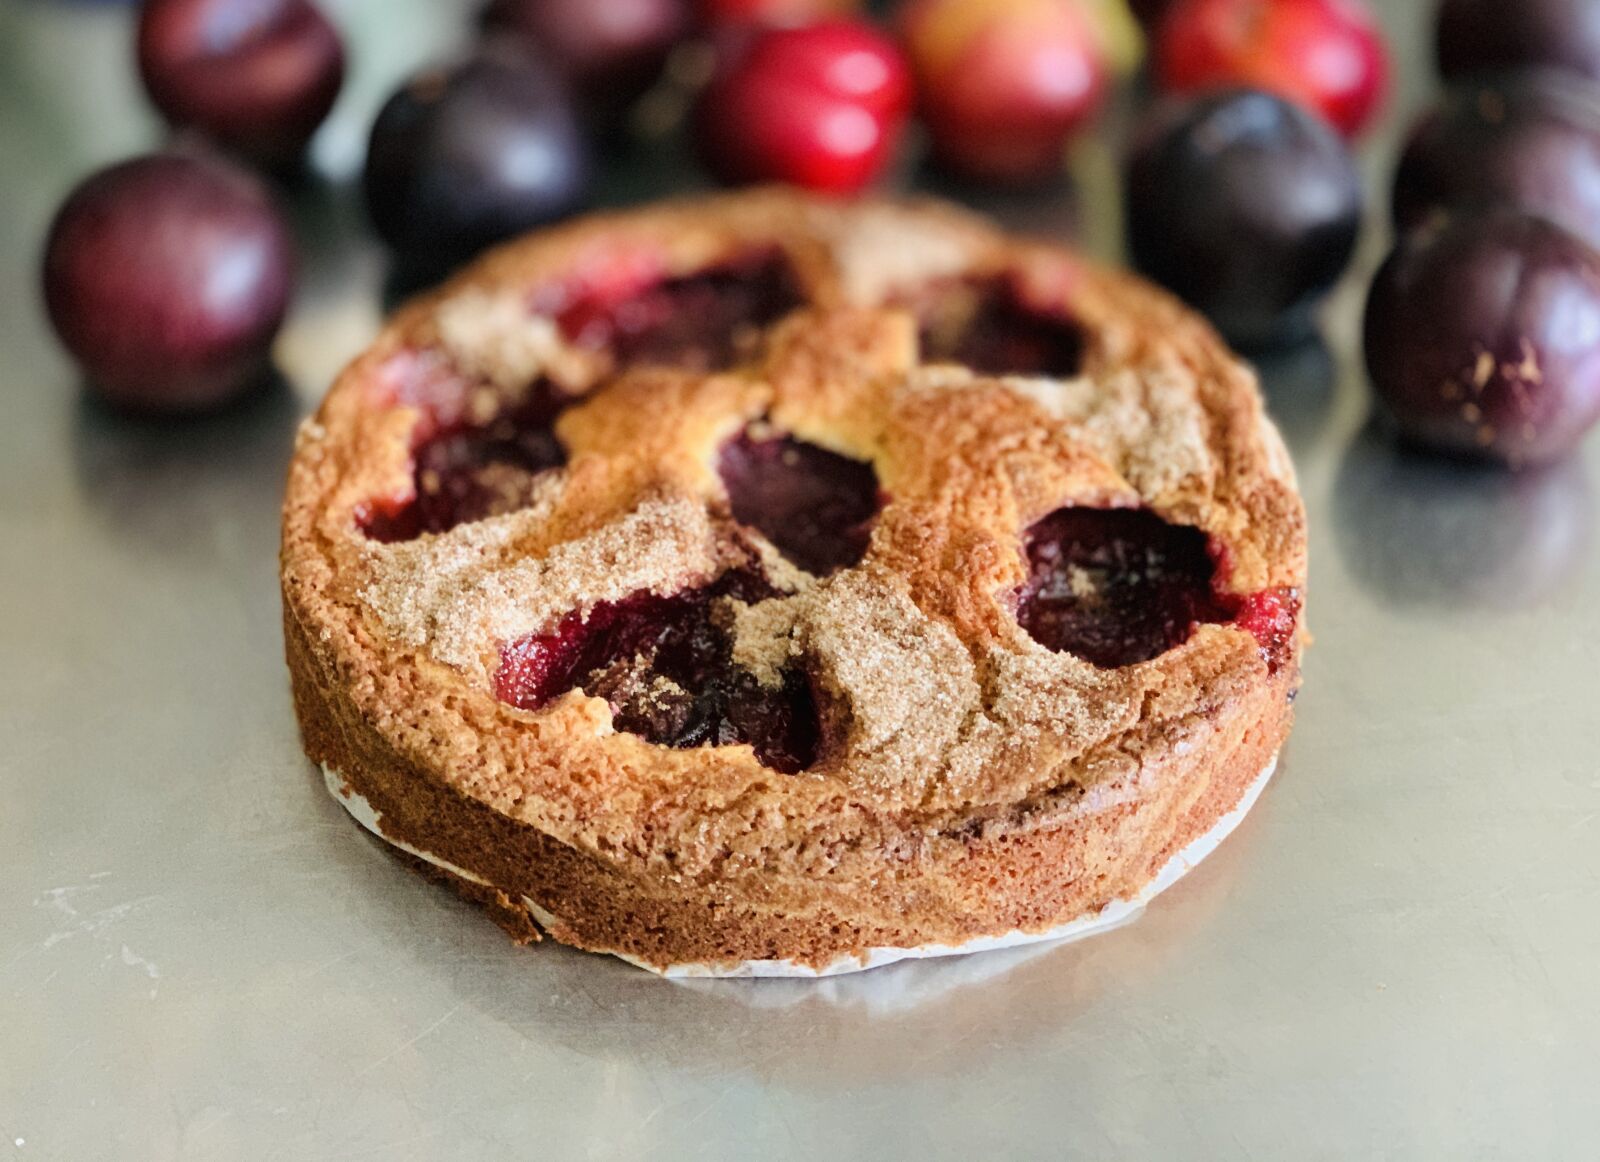 Apple iPhone XS Max + iPhone XS Max back dual camera 6mm f/2.4 sample photo. Plum tart, baked goods photography